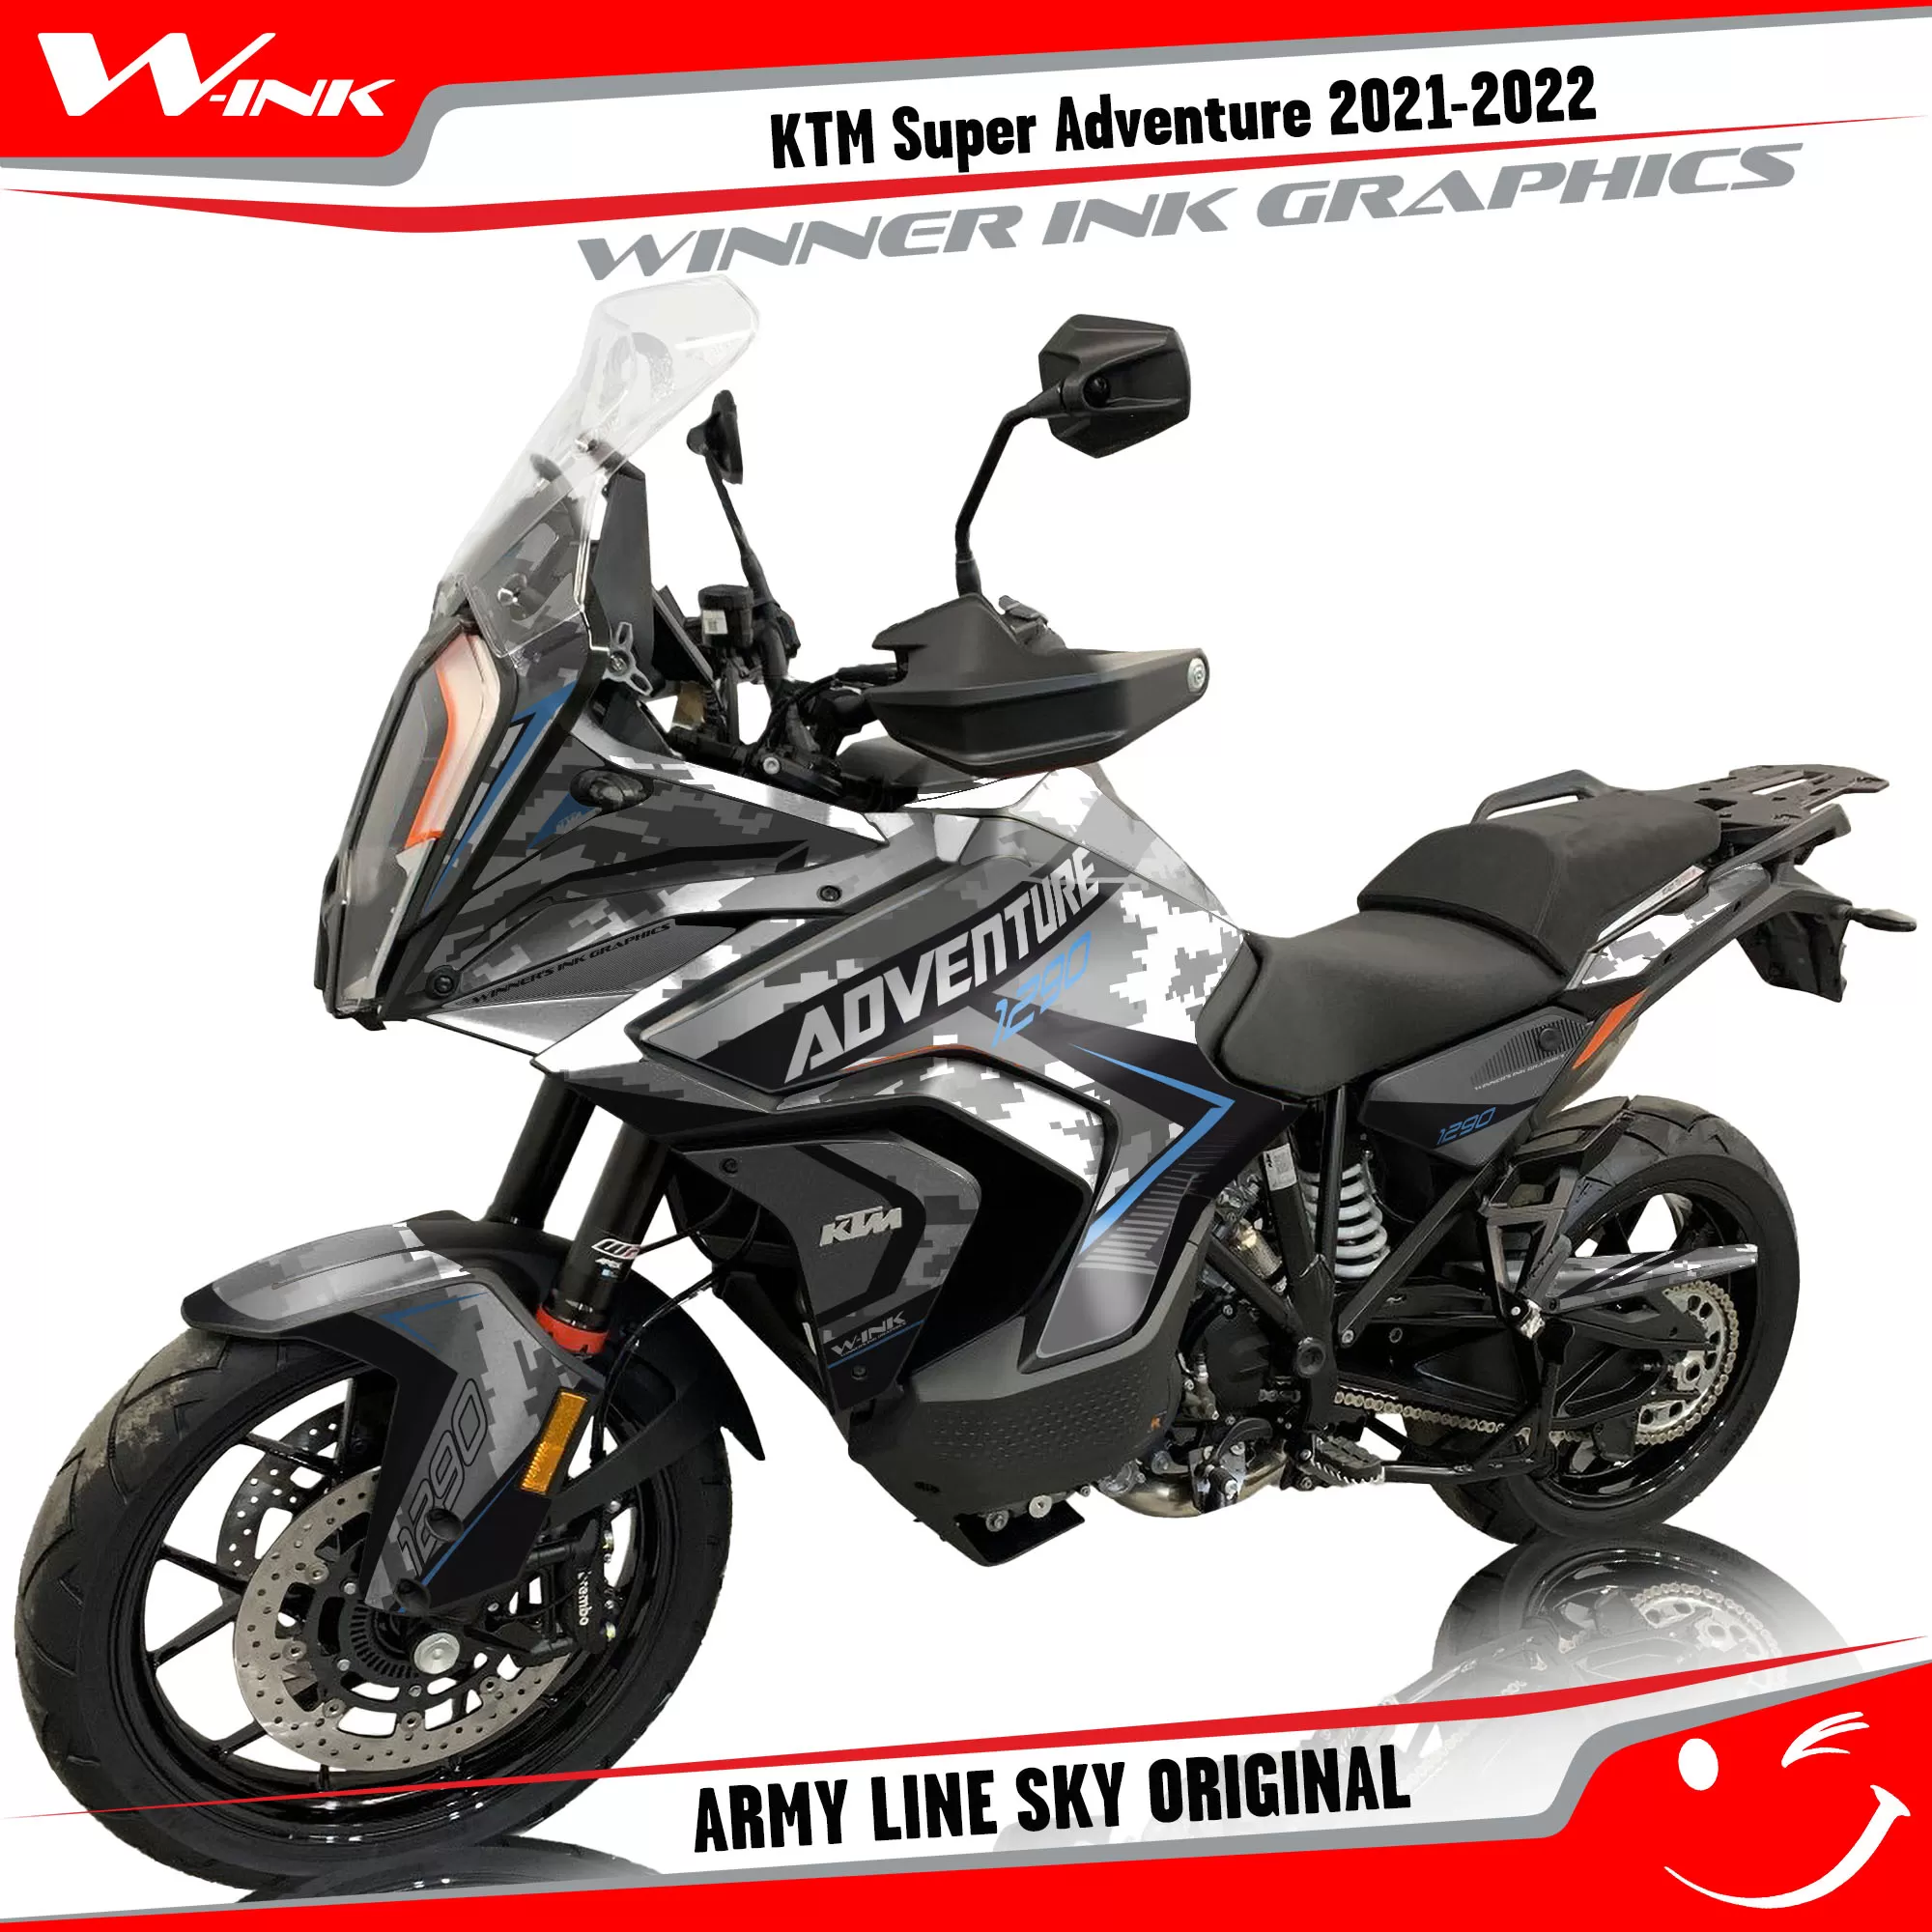 KTM-Super-Adventure-S-2021-2022-graphics-kit-and-decals-with-designs-Army-Line-Sky-Original